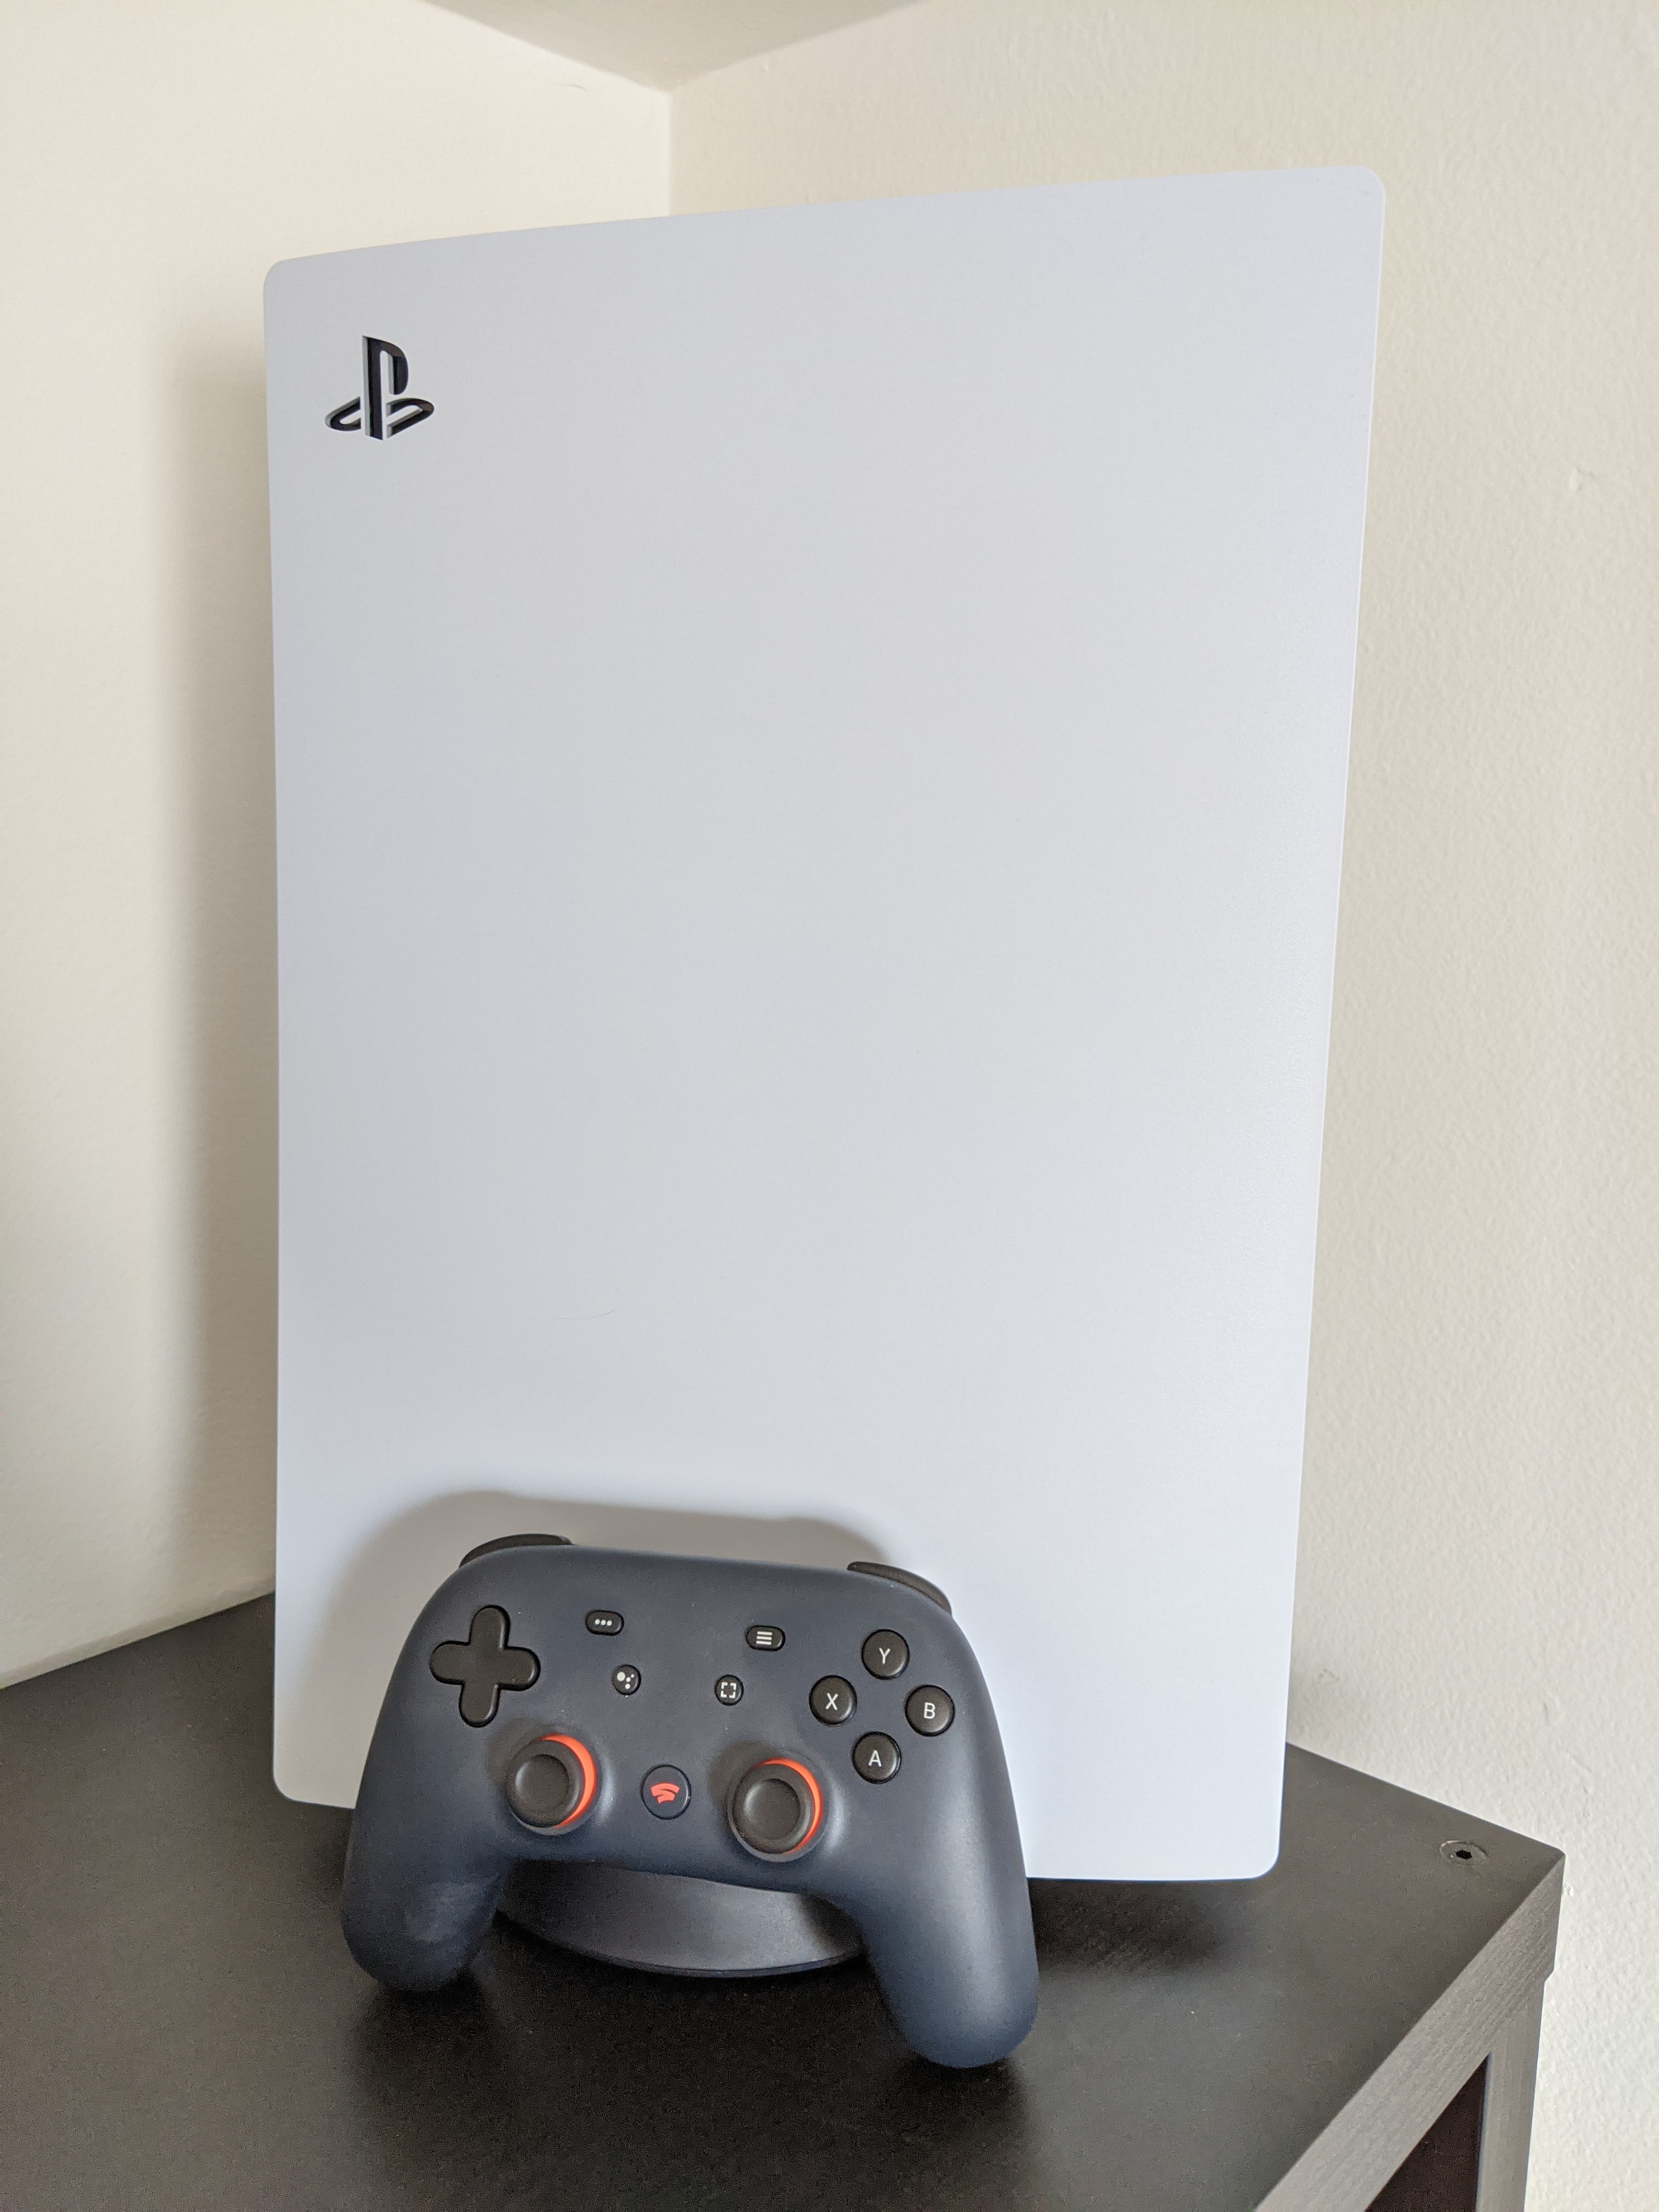 PS5 Next to a Stadia Founder's Edition Controller